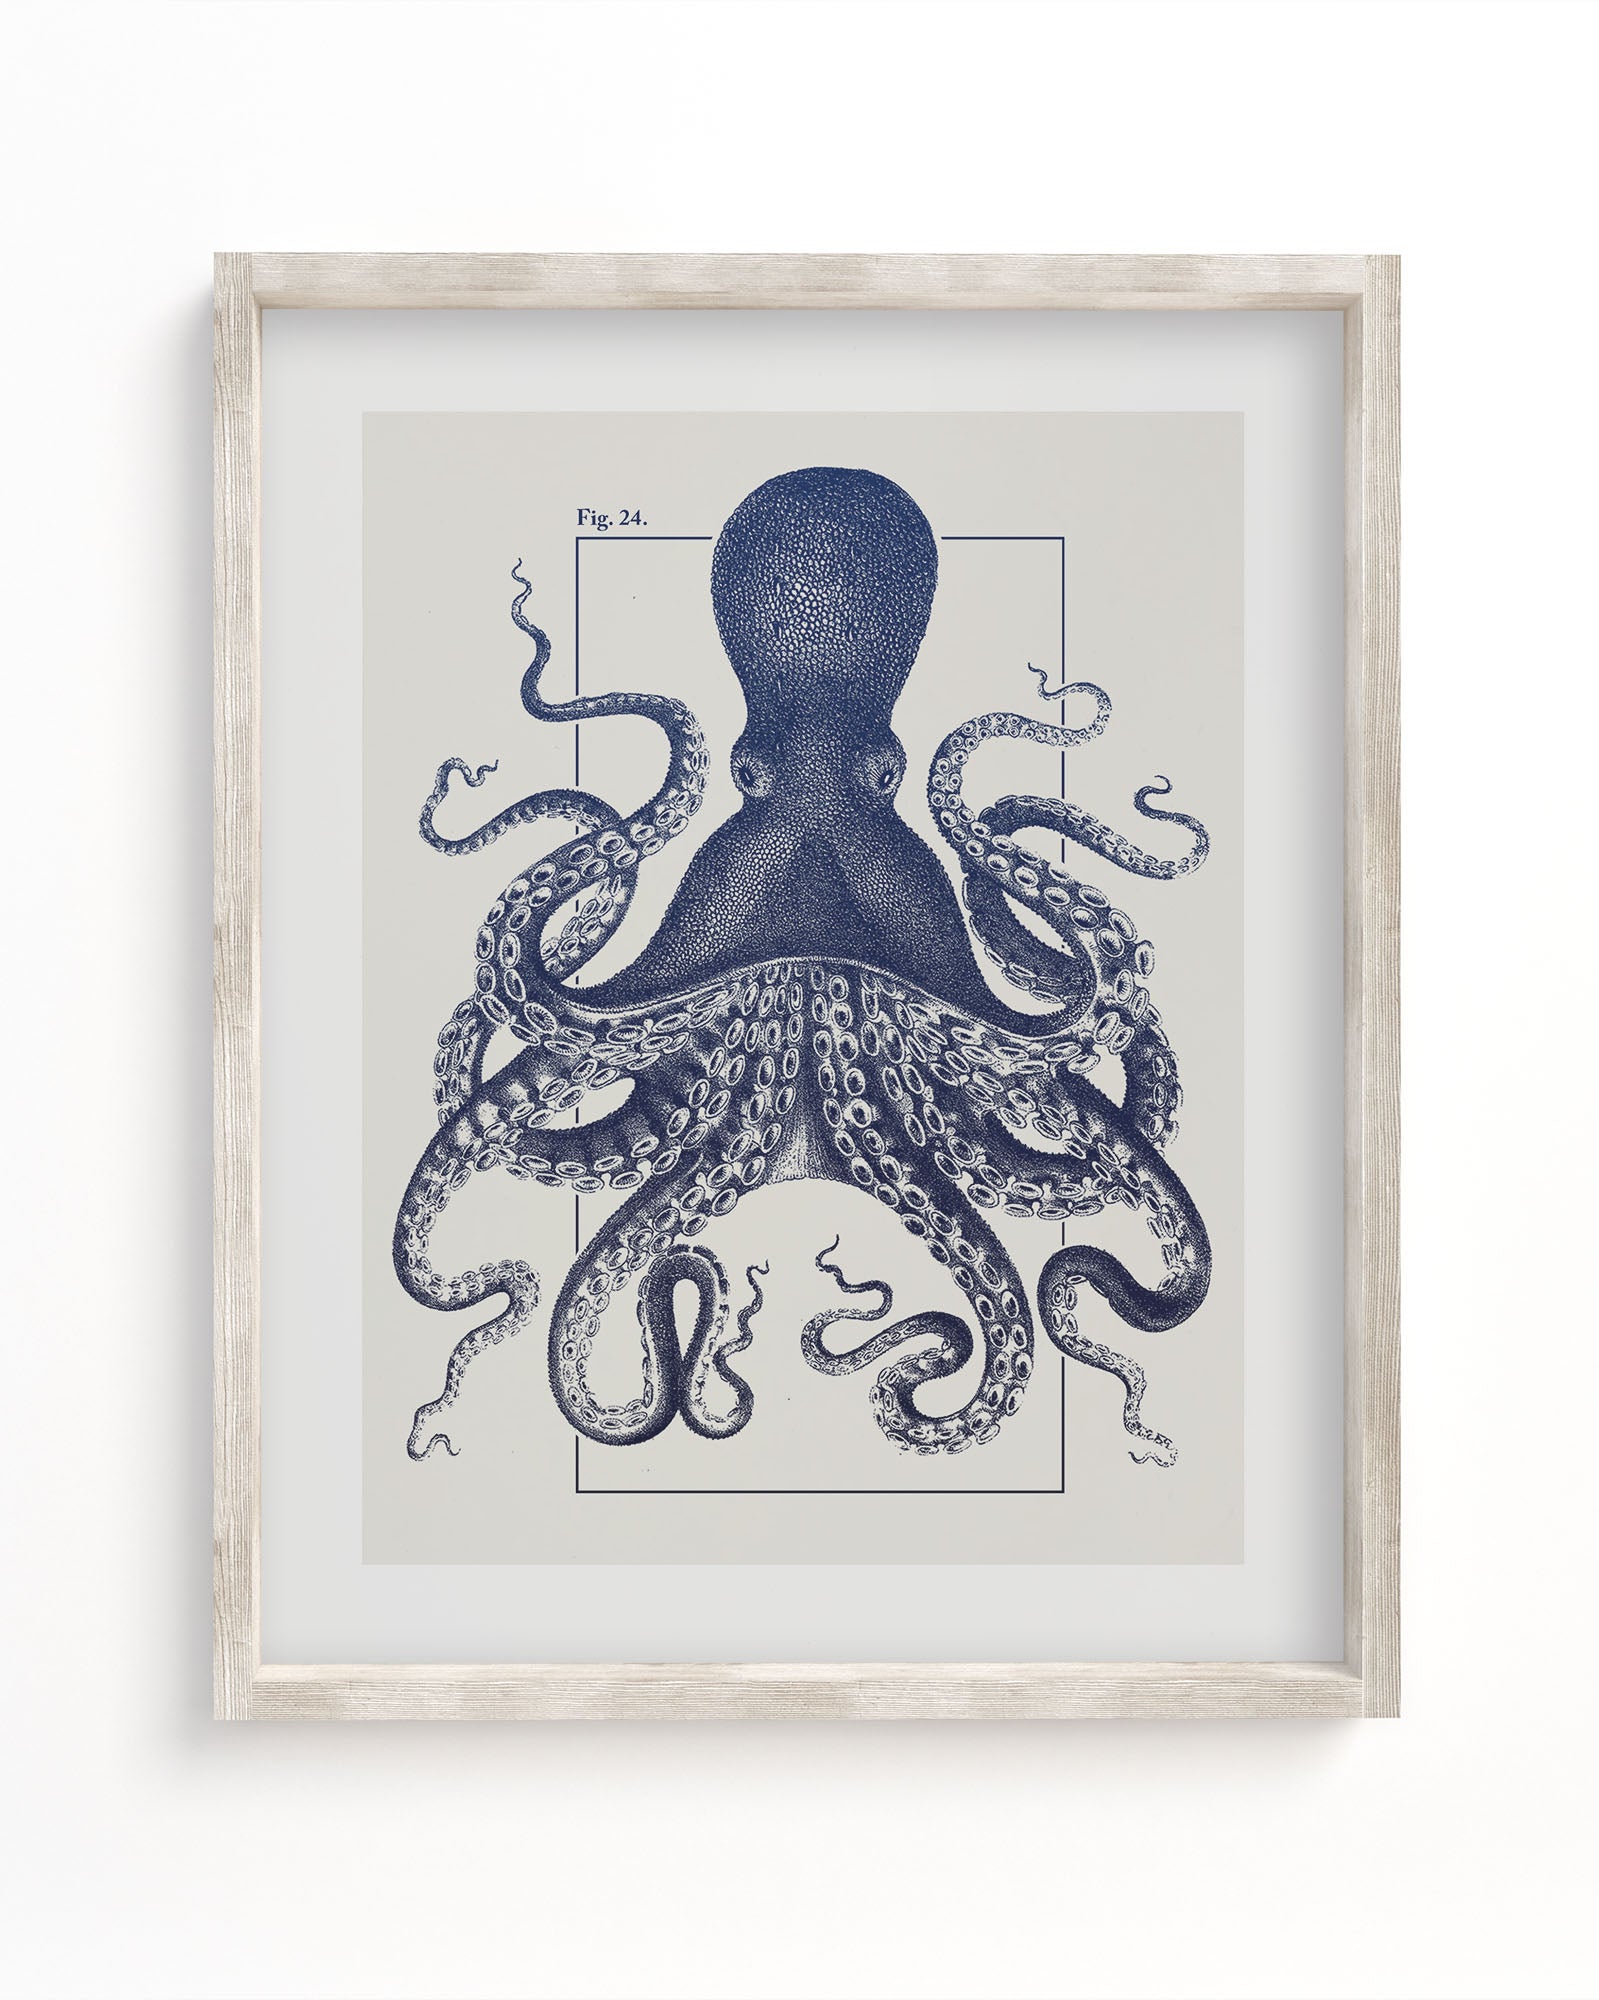 An Octopus Scientific Illustration Museum Print in a white frame by Cognitive Surplus.